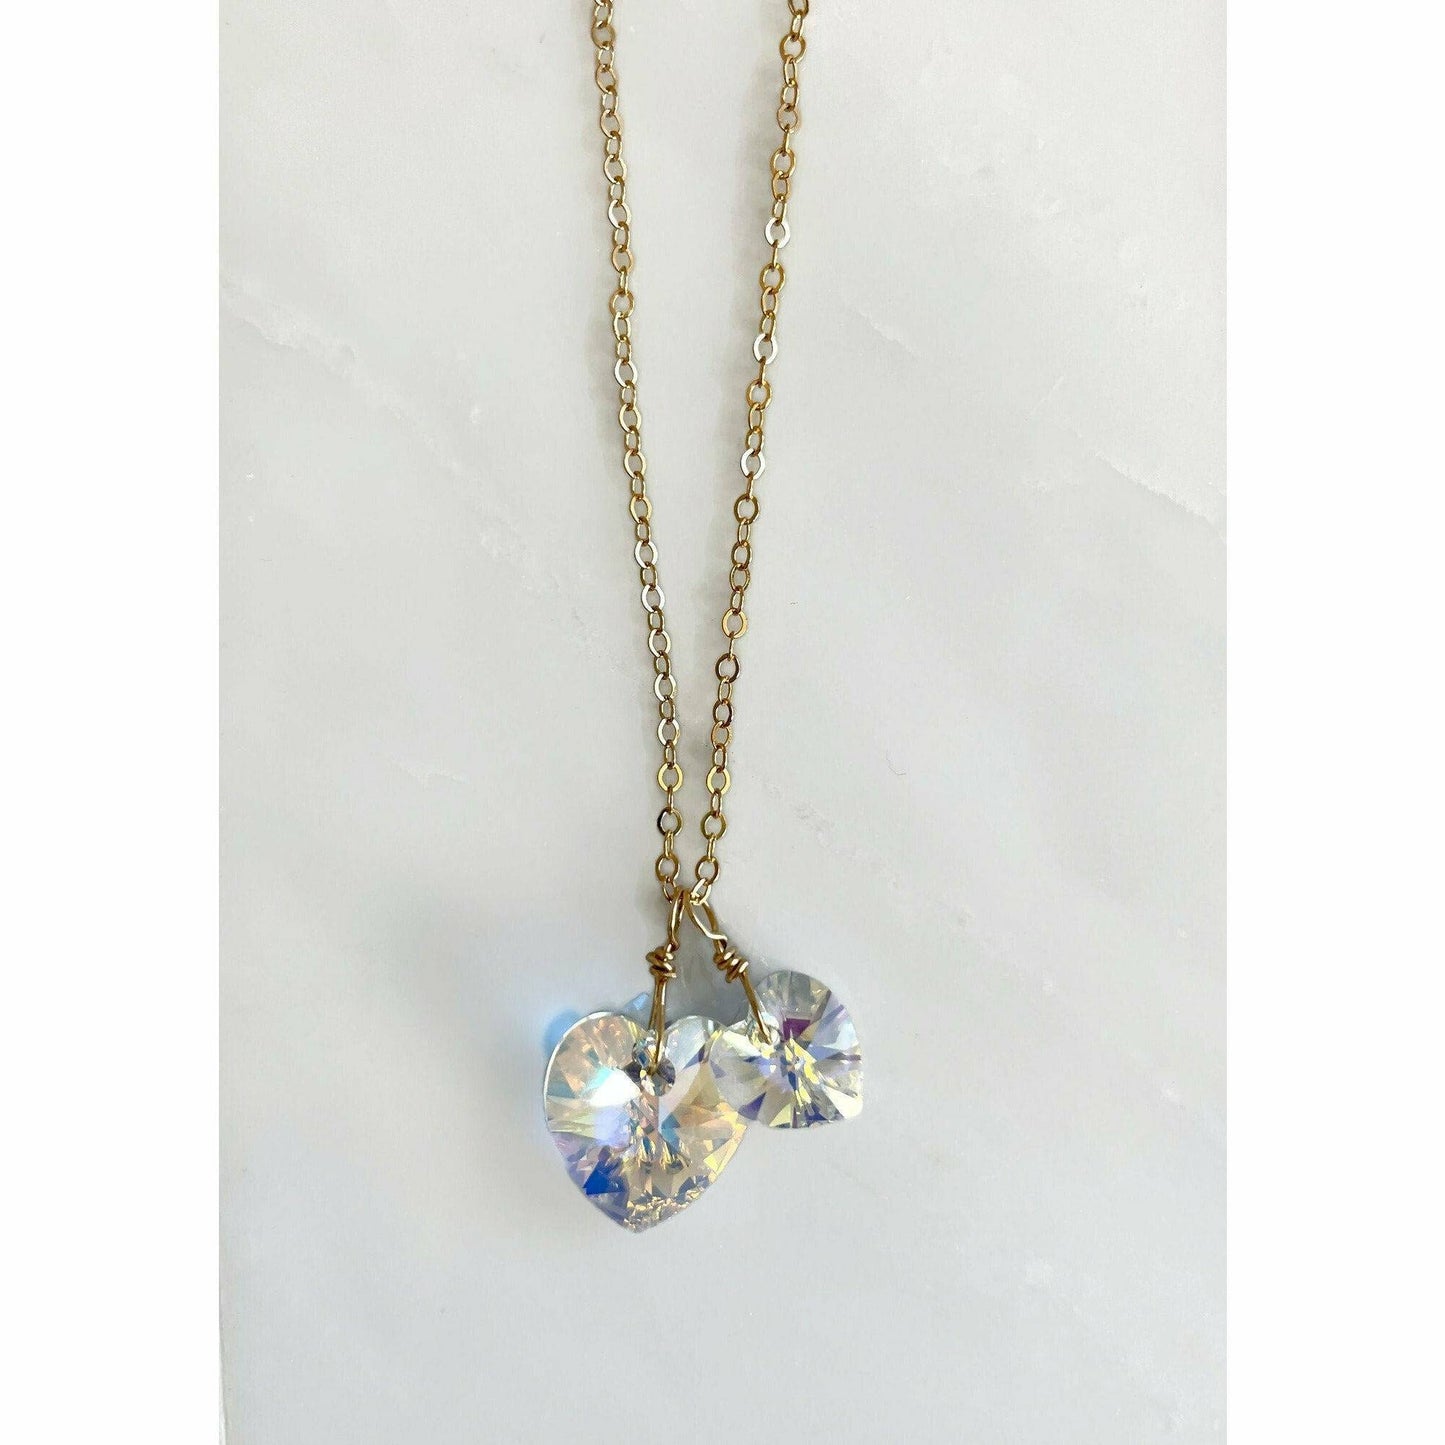 Two hearts necklace crystal necklace in clear ab